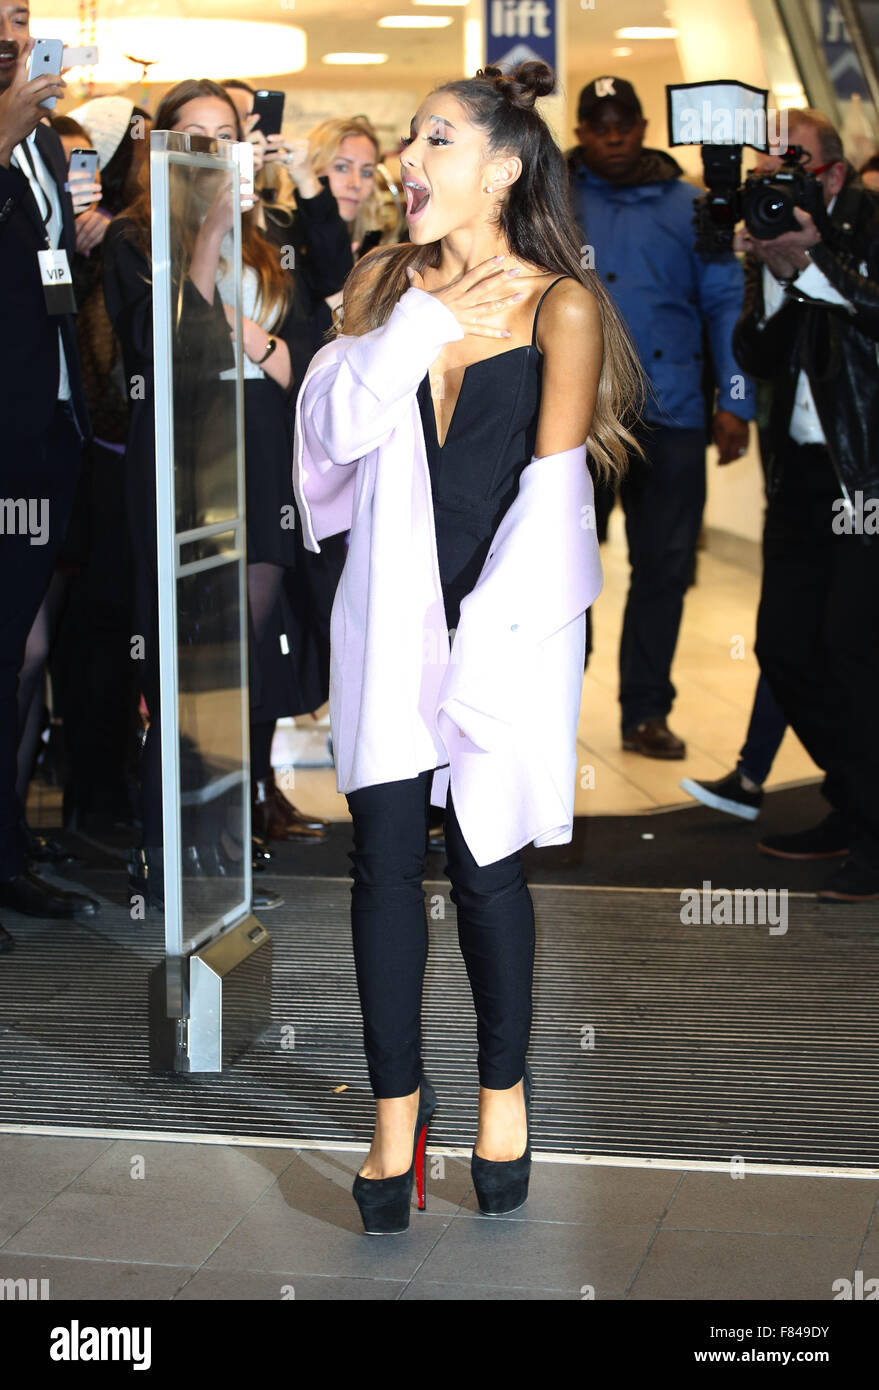 Ariana Grande launches her debut fragrance, Ari by Ariana Grande and does a  meet and greet at Boots. She was over an hour late and charged fans £103.00  to take part in